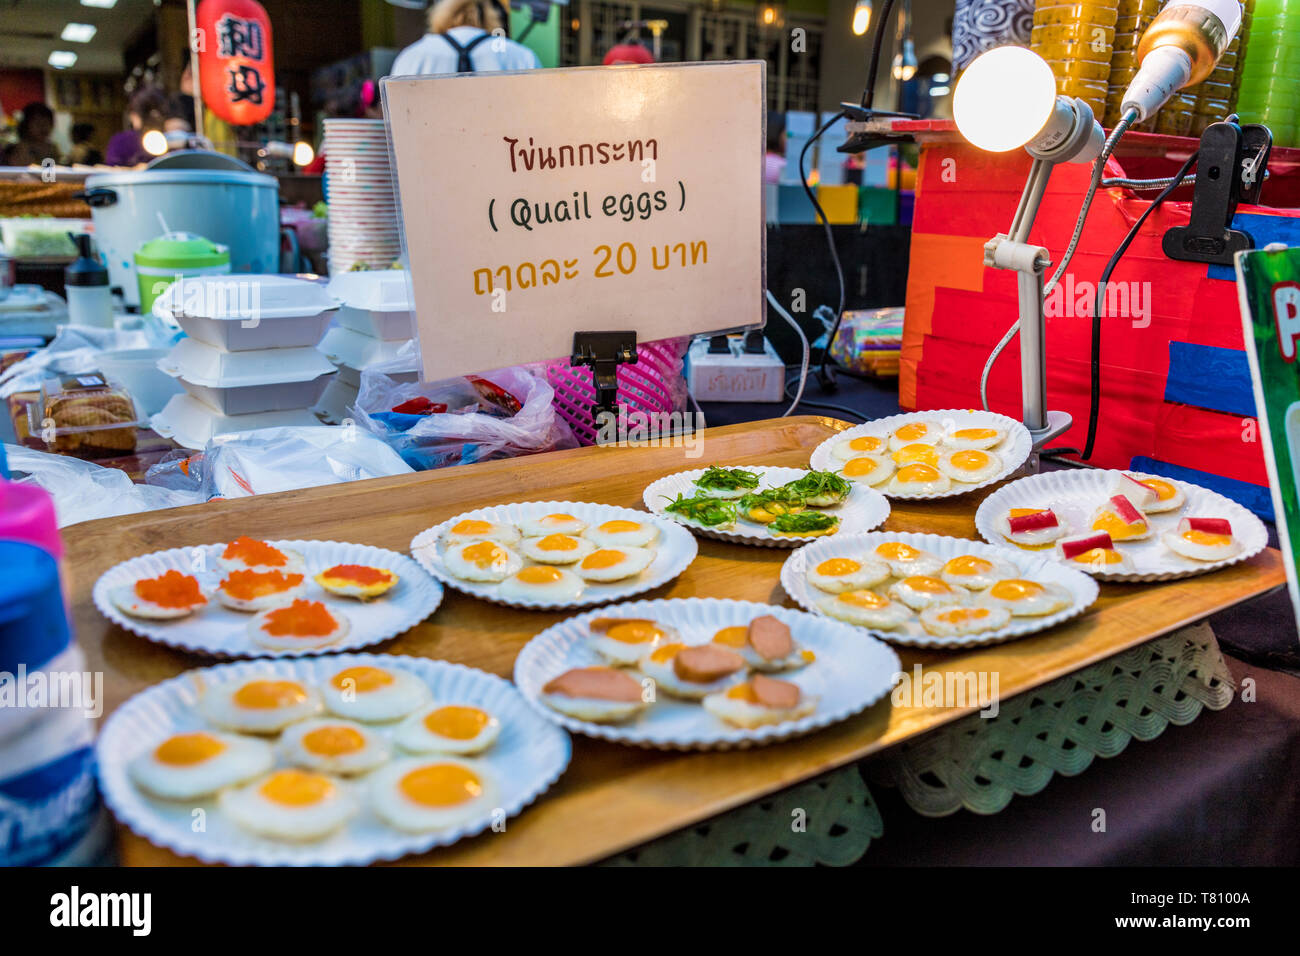 Quails eggs for sale at the famous Walking Street night market in Phuket old Town, Phuket, Thailand, Southeast Asia, Asia Stock Photo